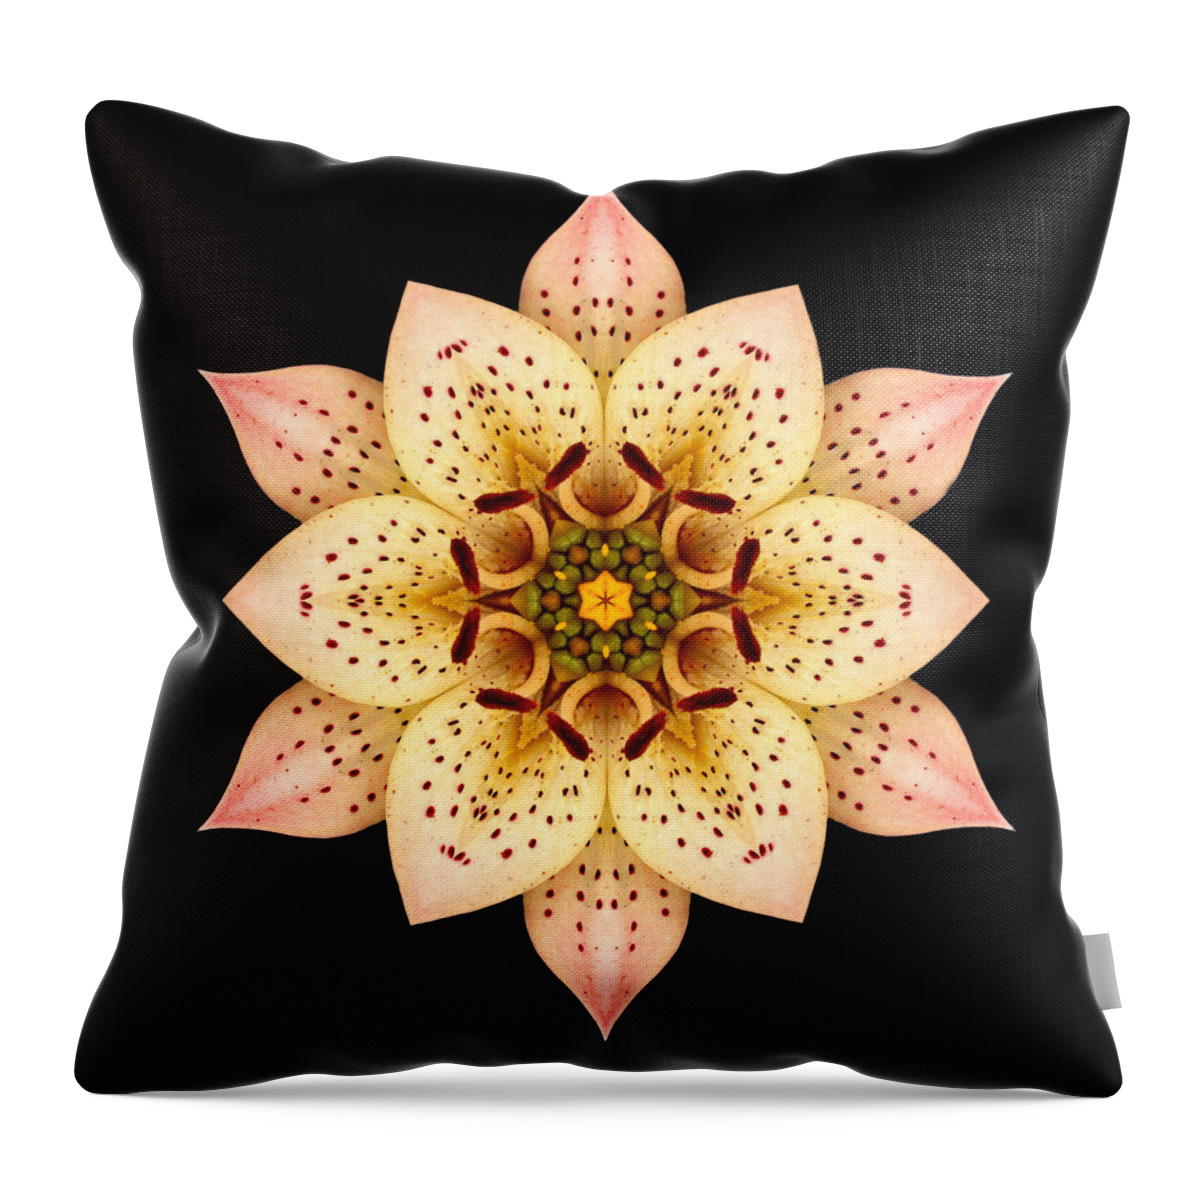 Flower Throw Pillow featuring the photograph Asiatic Lily Flower Mandala by David J Bookbinder